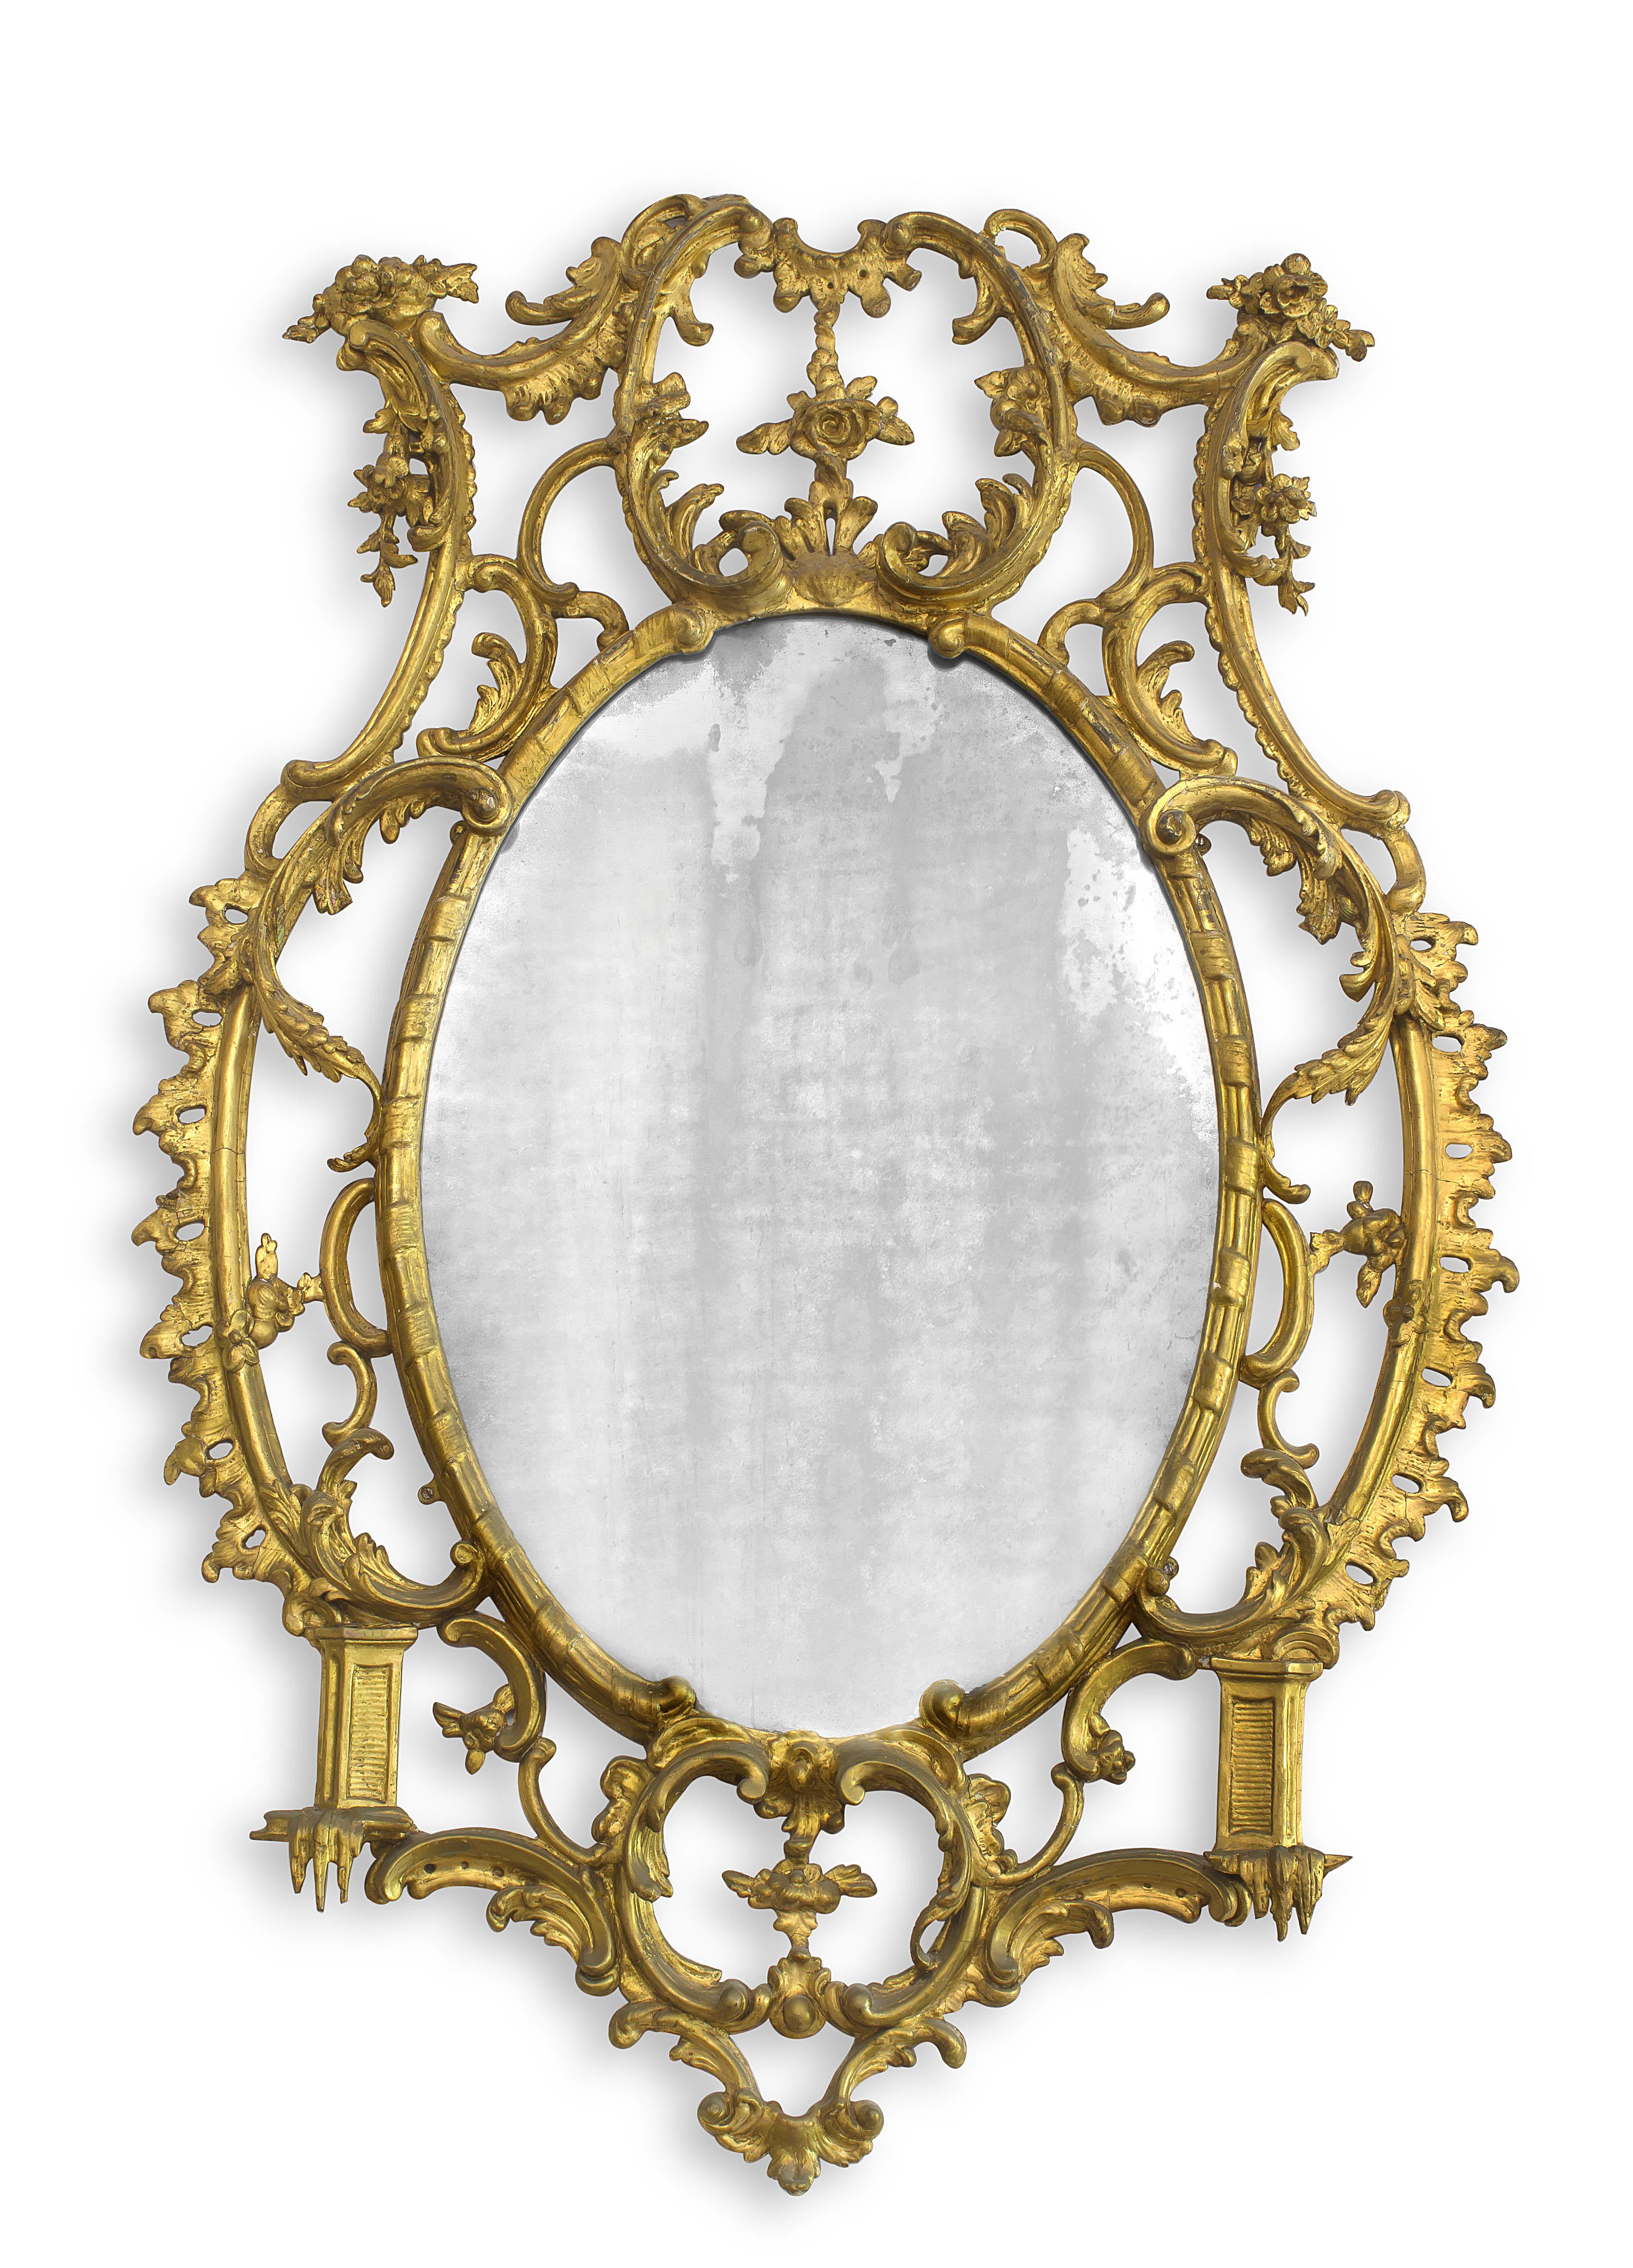 A chinnoiserie style gilt gesso mirror, late 19th/early 20th century